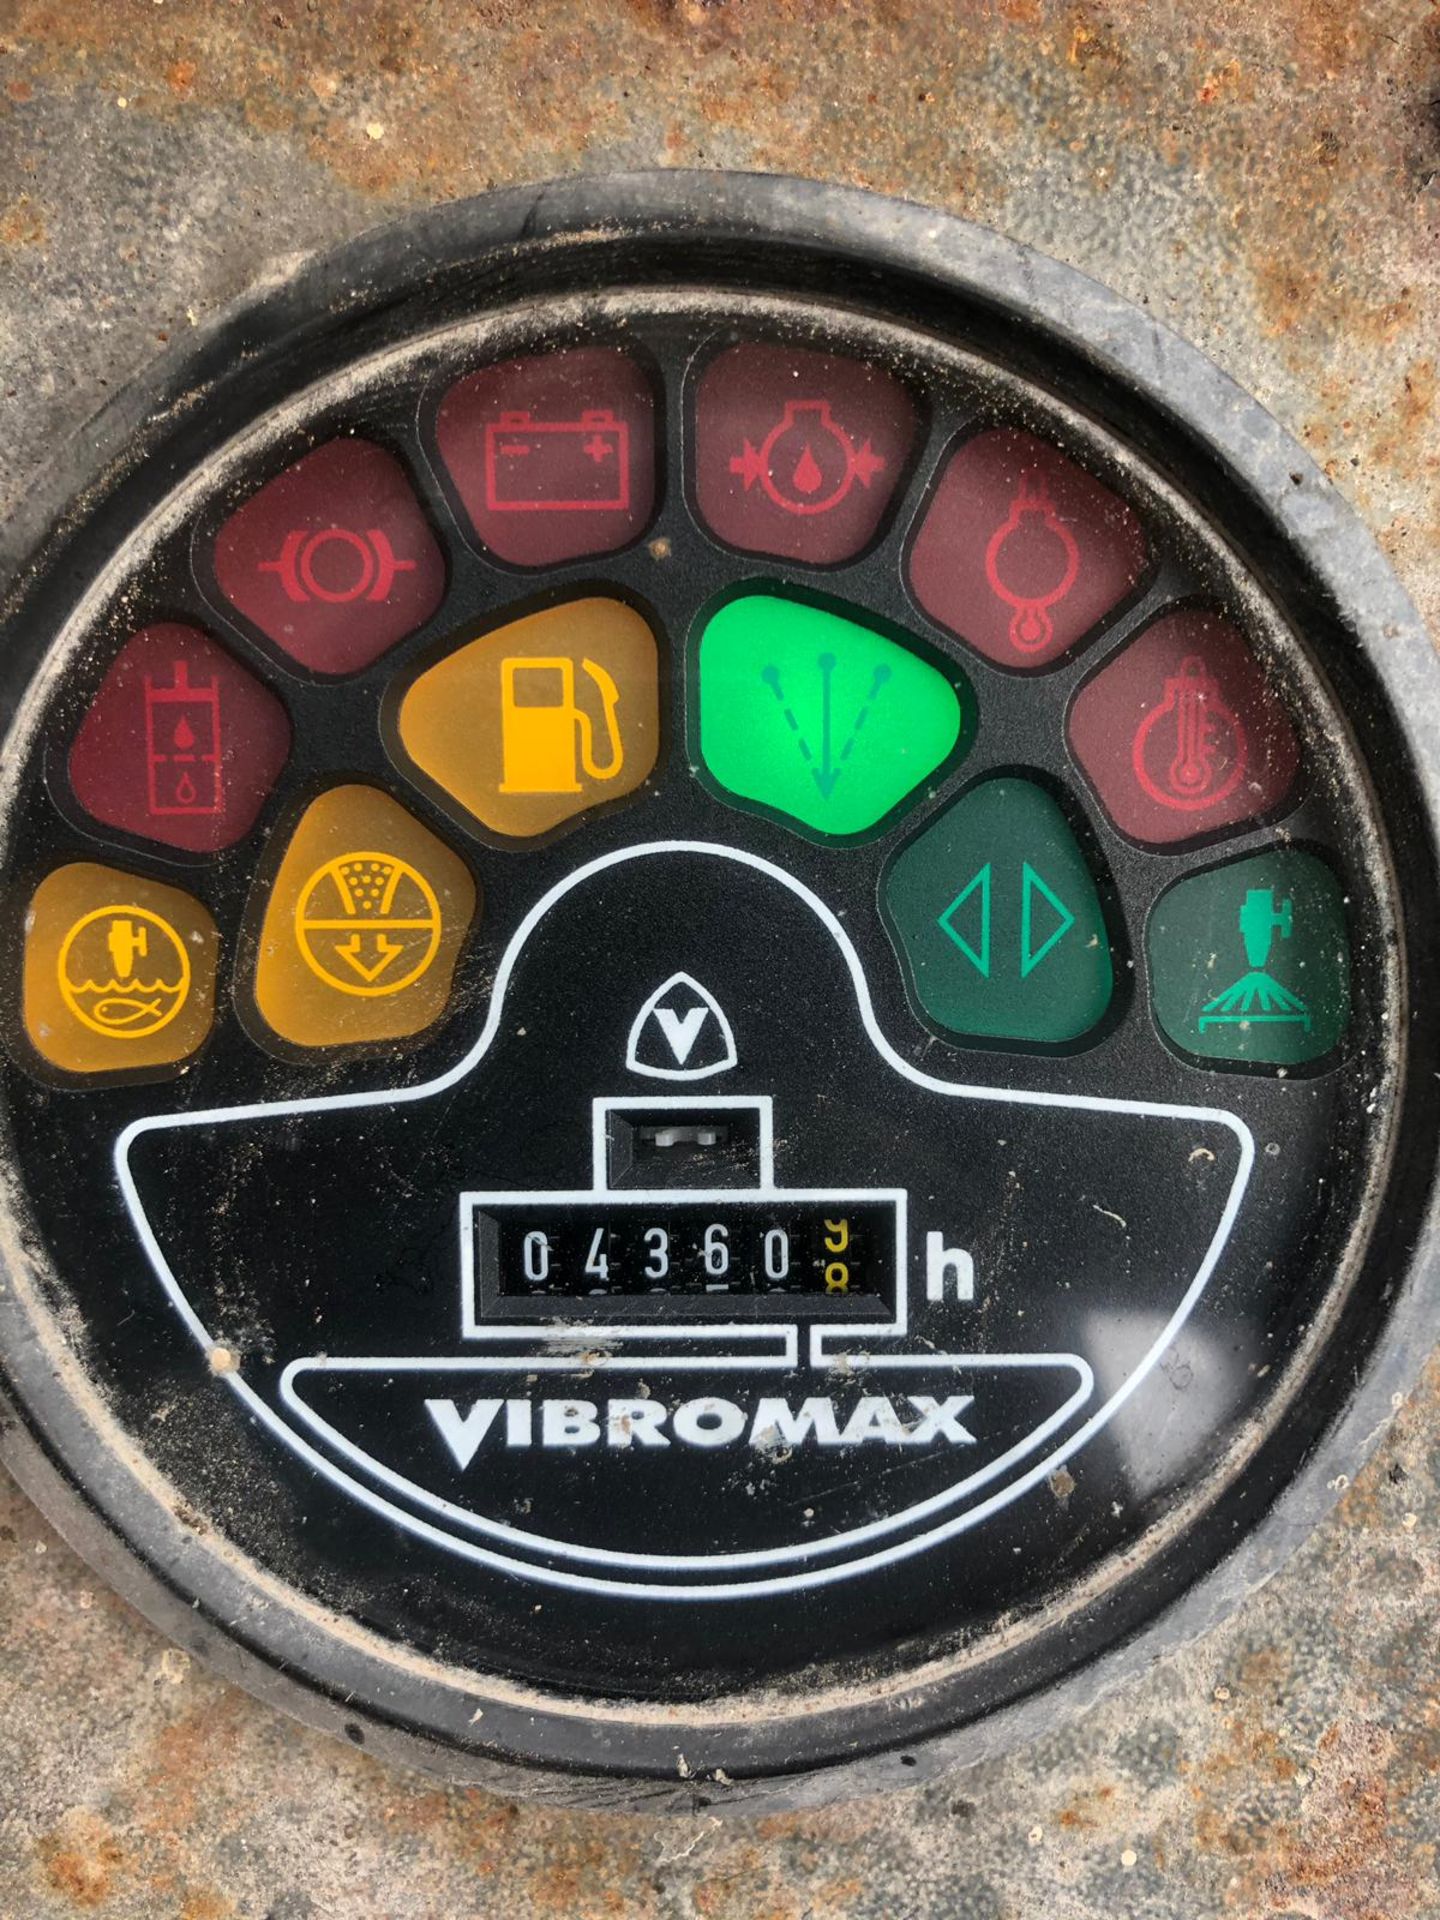 VIBROMAX W752 ROLLER, YEAR UNKNOWN, RUNS WORKS AND VIBRATES *PLUS VAT* - Image 11 of 11